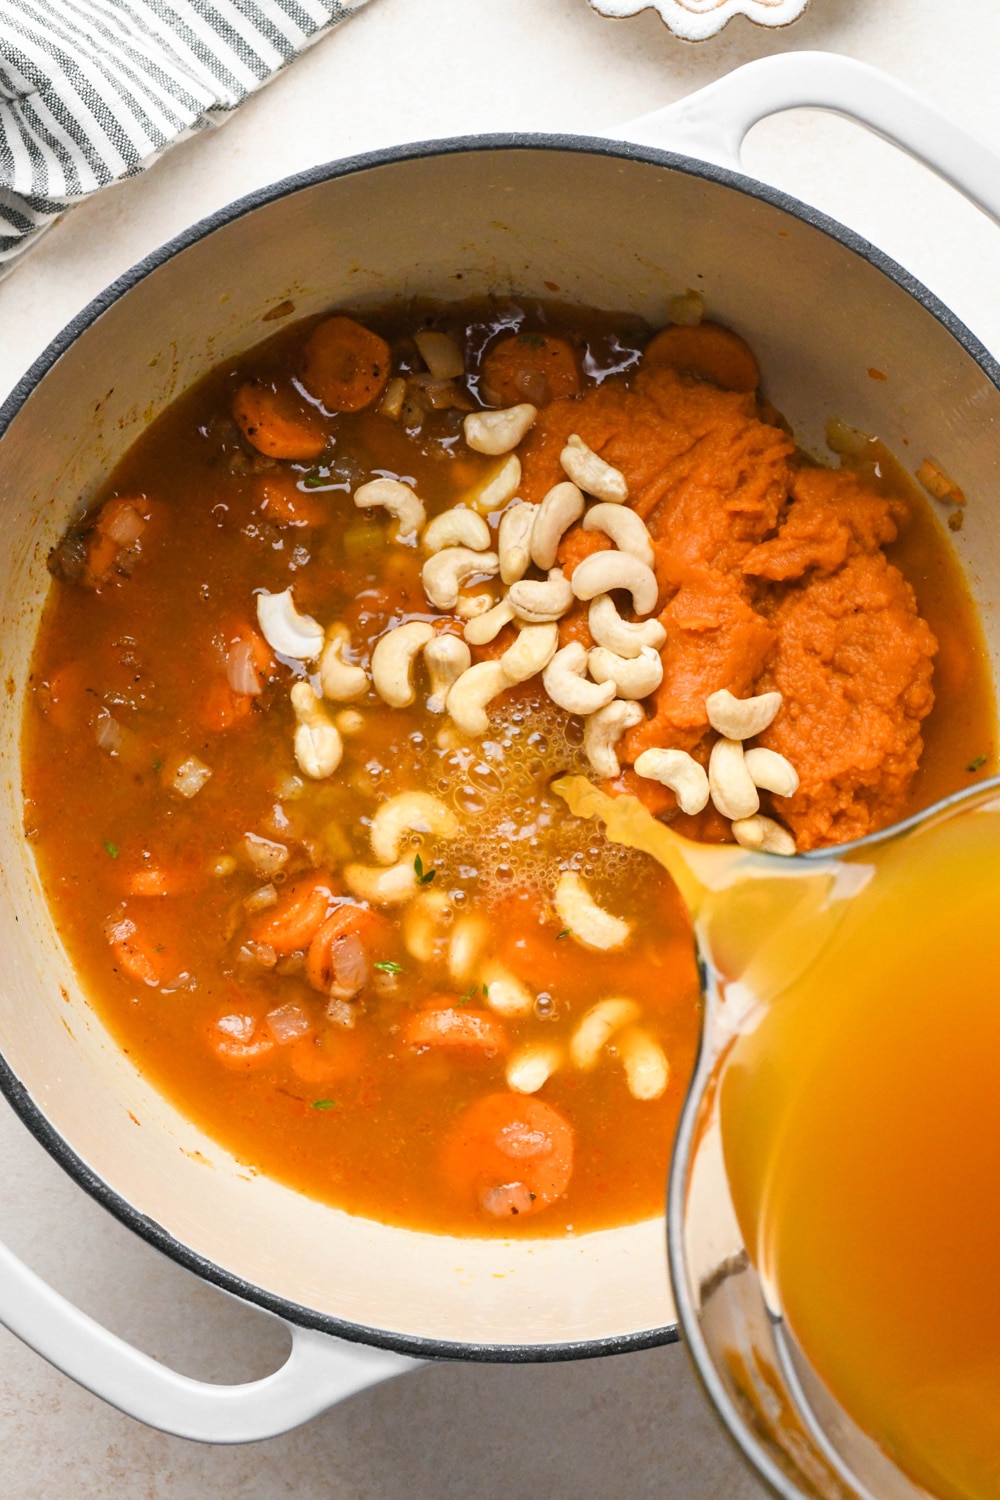 How to make Dairy Free Pumpkin Carrot Soup: Pouring vegetable broth into the soup pot.